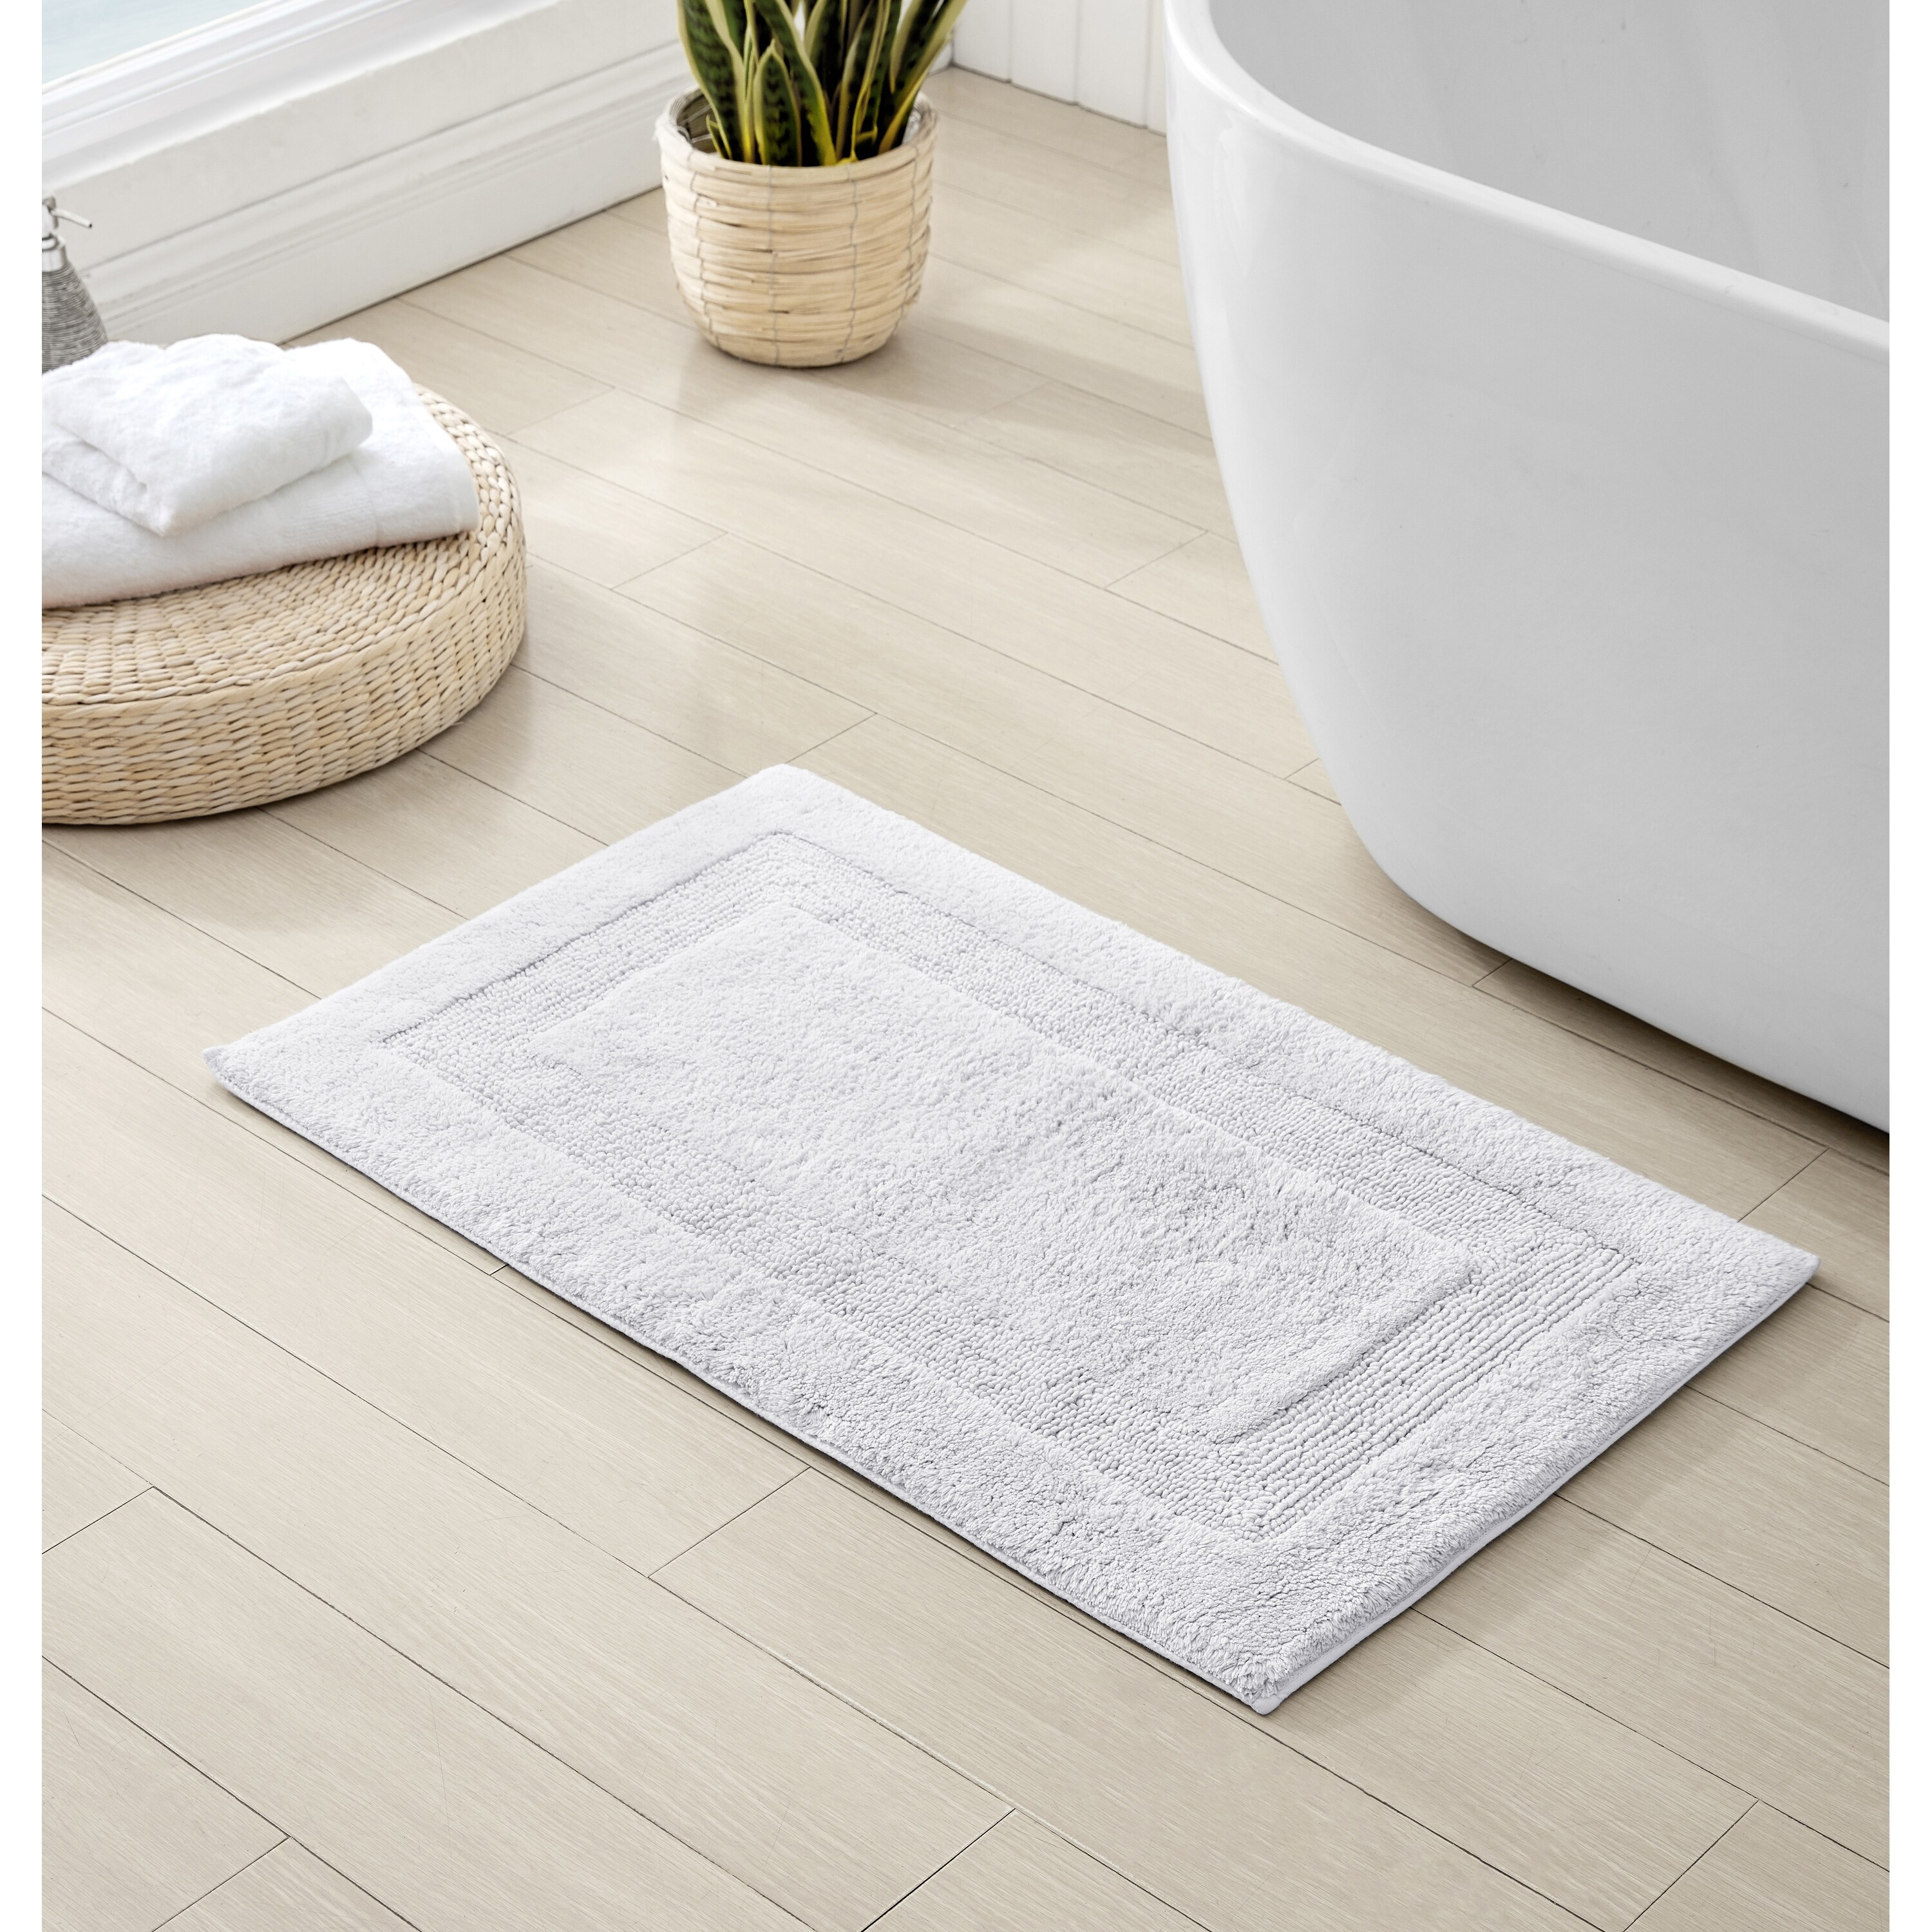 https://ak1.ostkcdn.com/images/products/is/images/direct/582dfbb75abf7a5f64a7f14ac17358fccdbd3b1e/Tommy-Bahama-Long-Branch-Cotton-Reversible-Bath-Rug.jpg